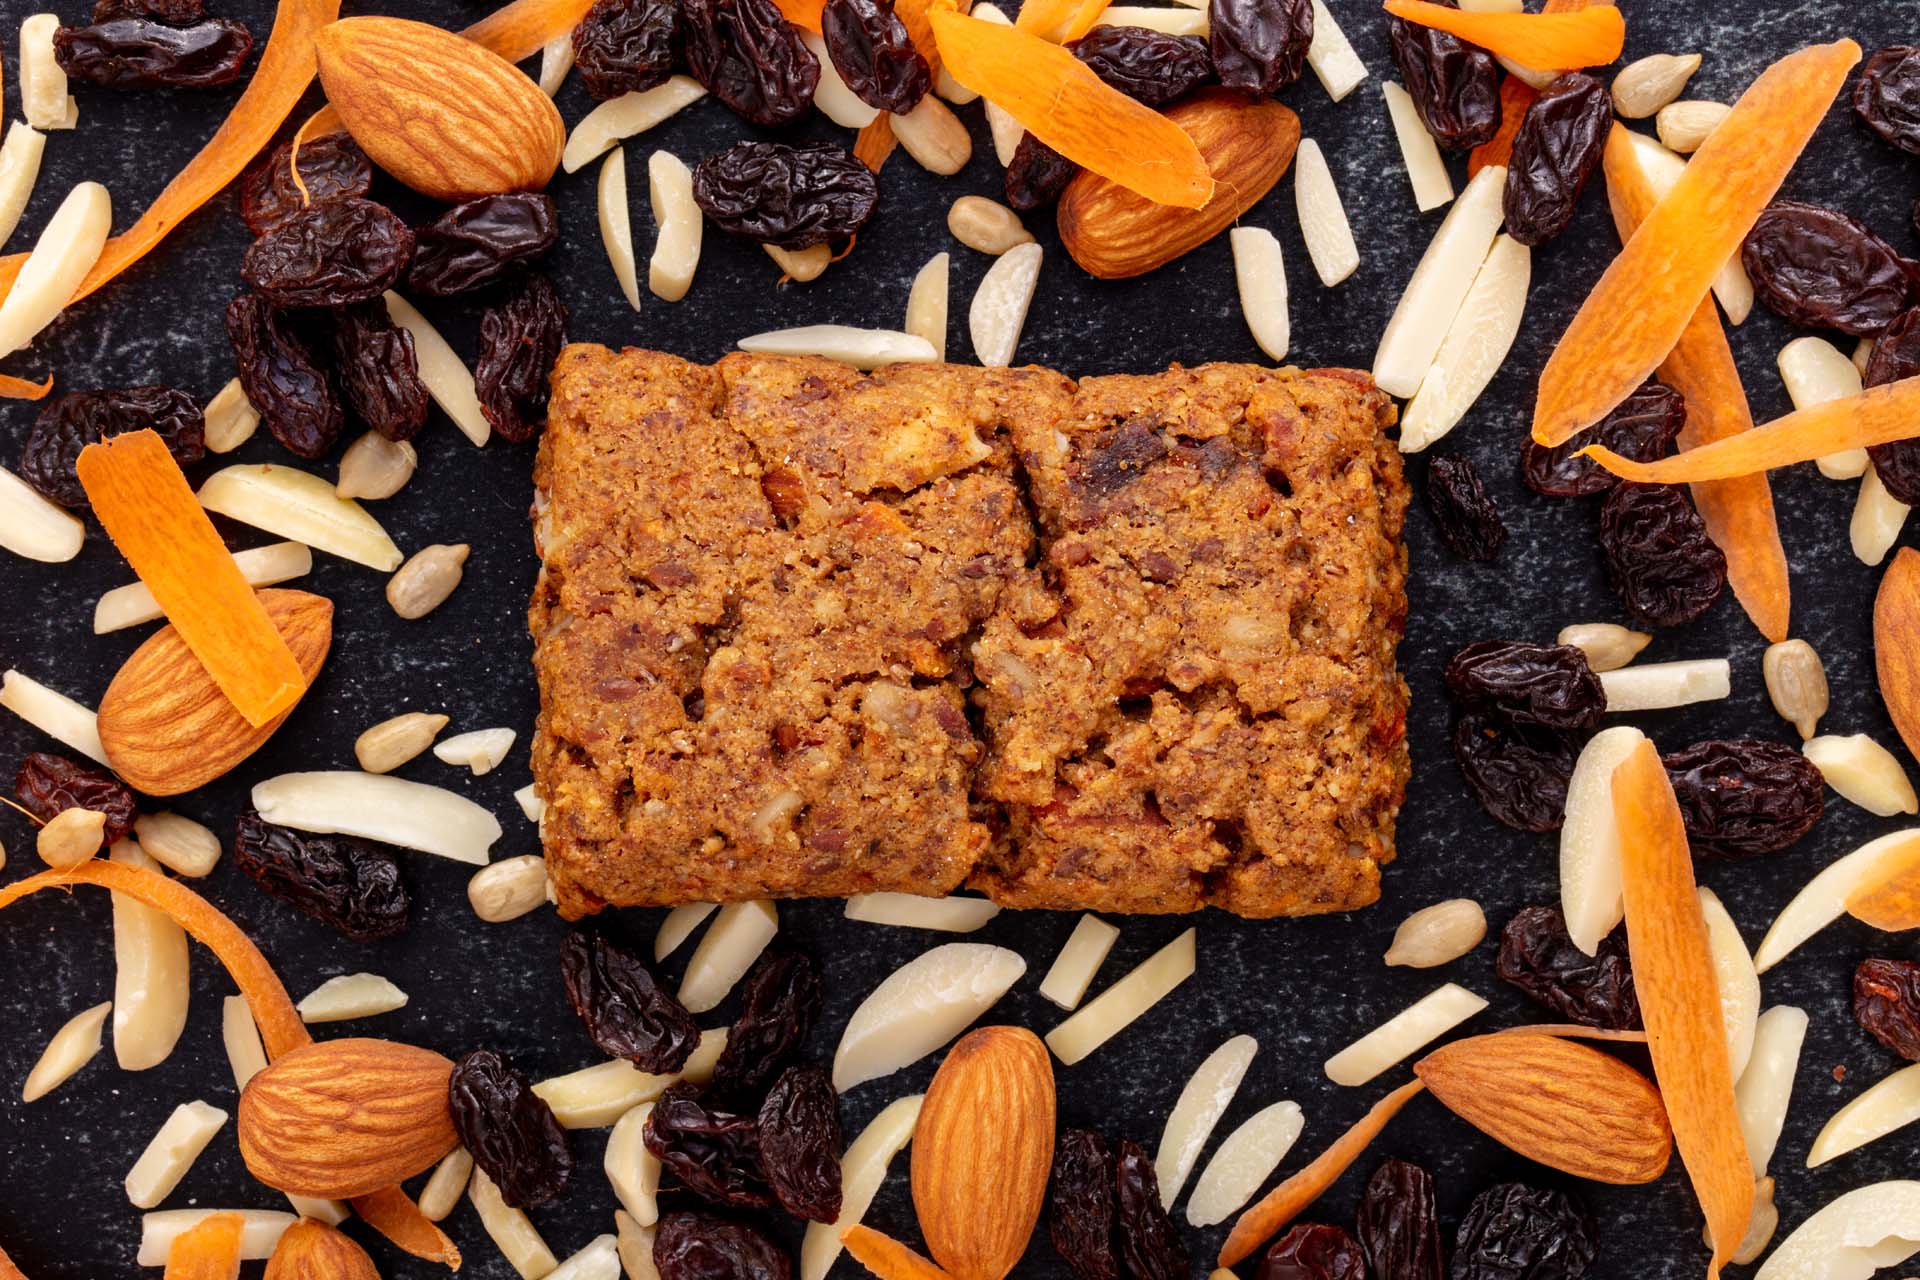 Soft Nutrition Bar Surrounded by an Assortment of Whole, Halved, Slivered, and Diced Almonds